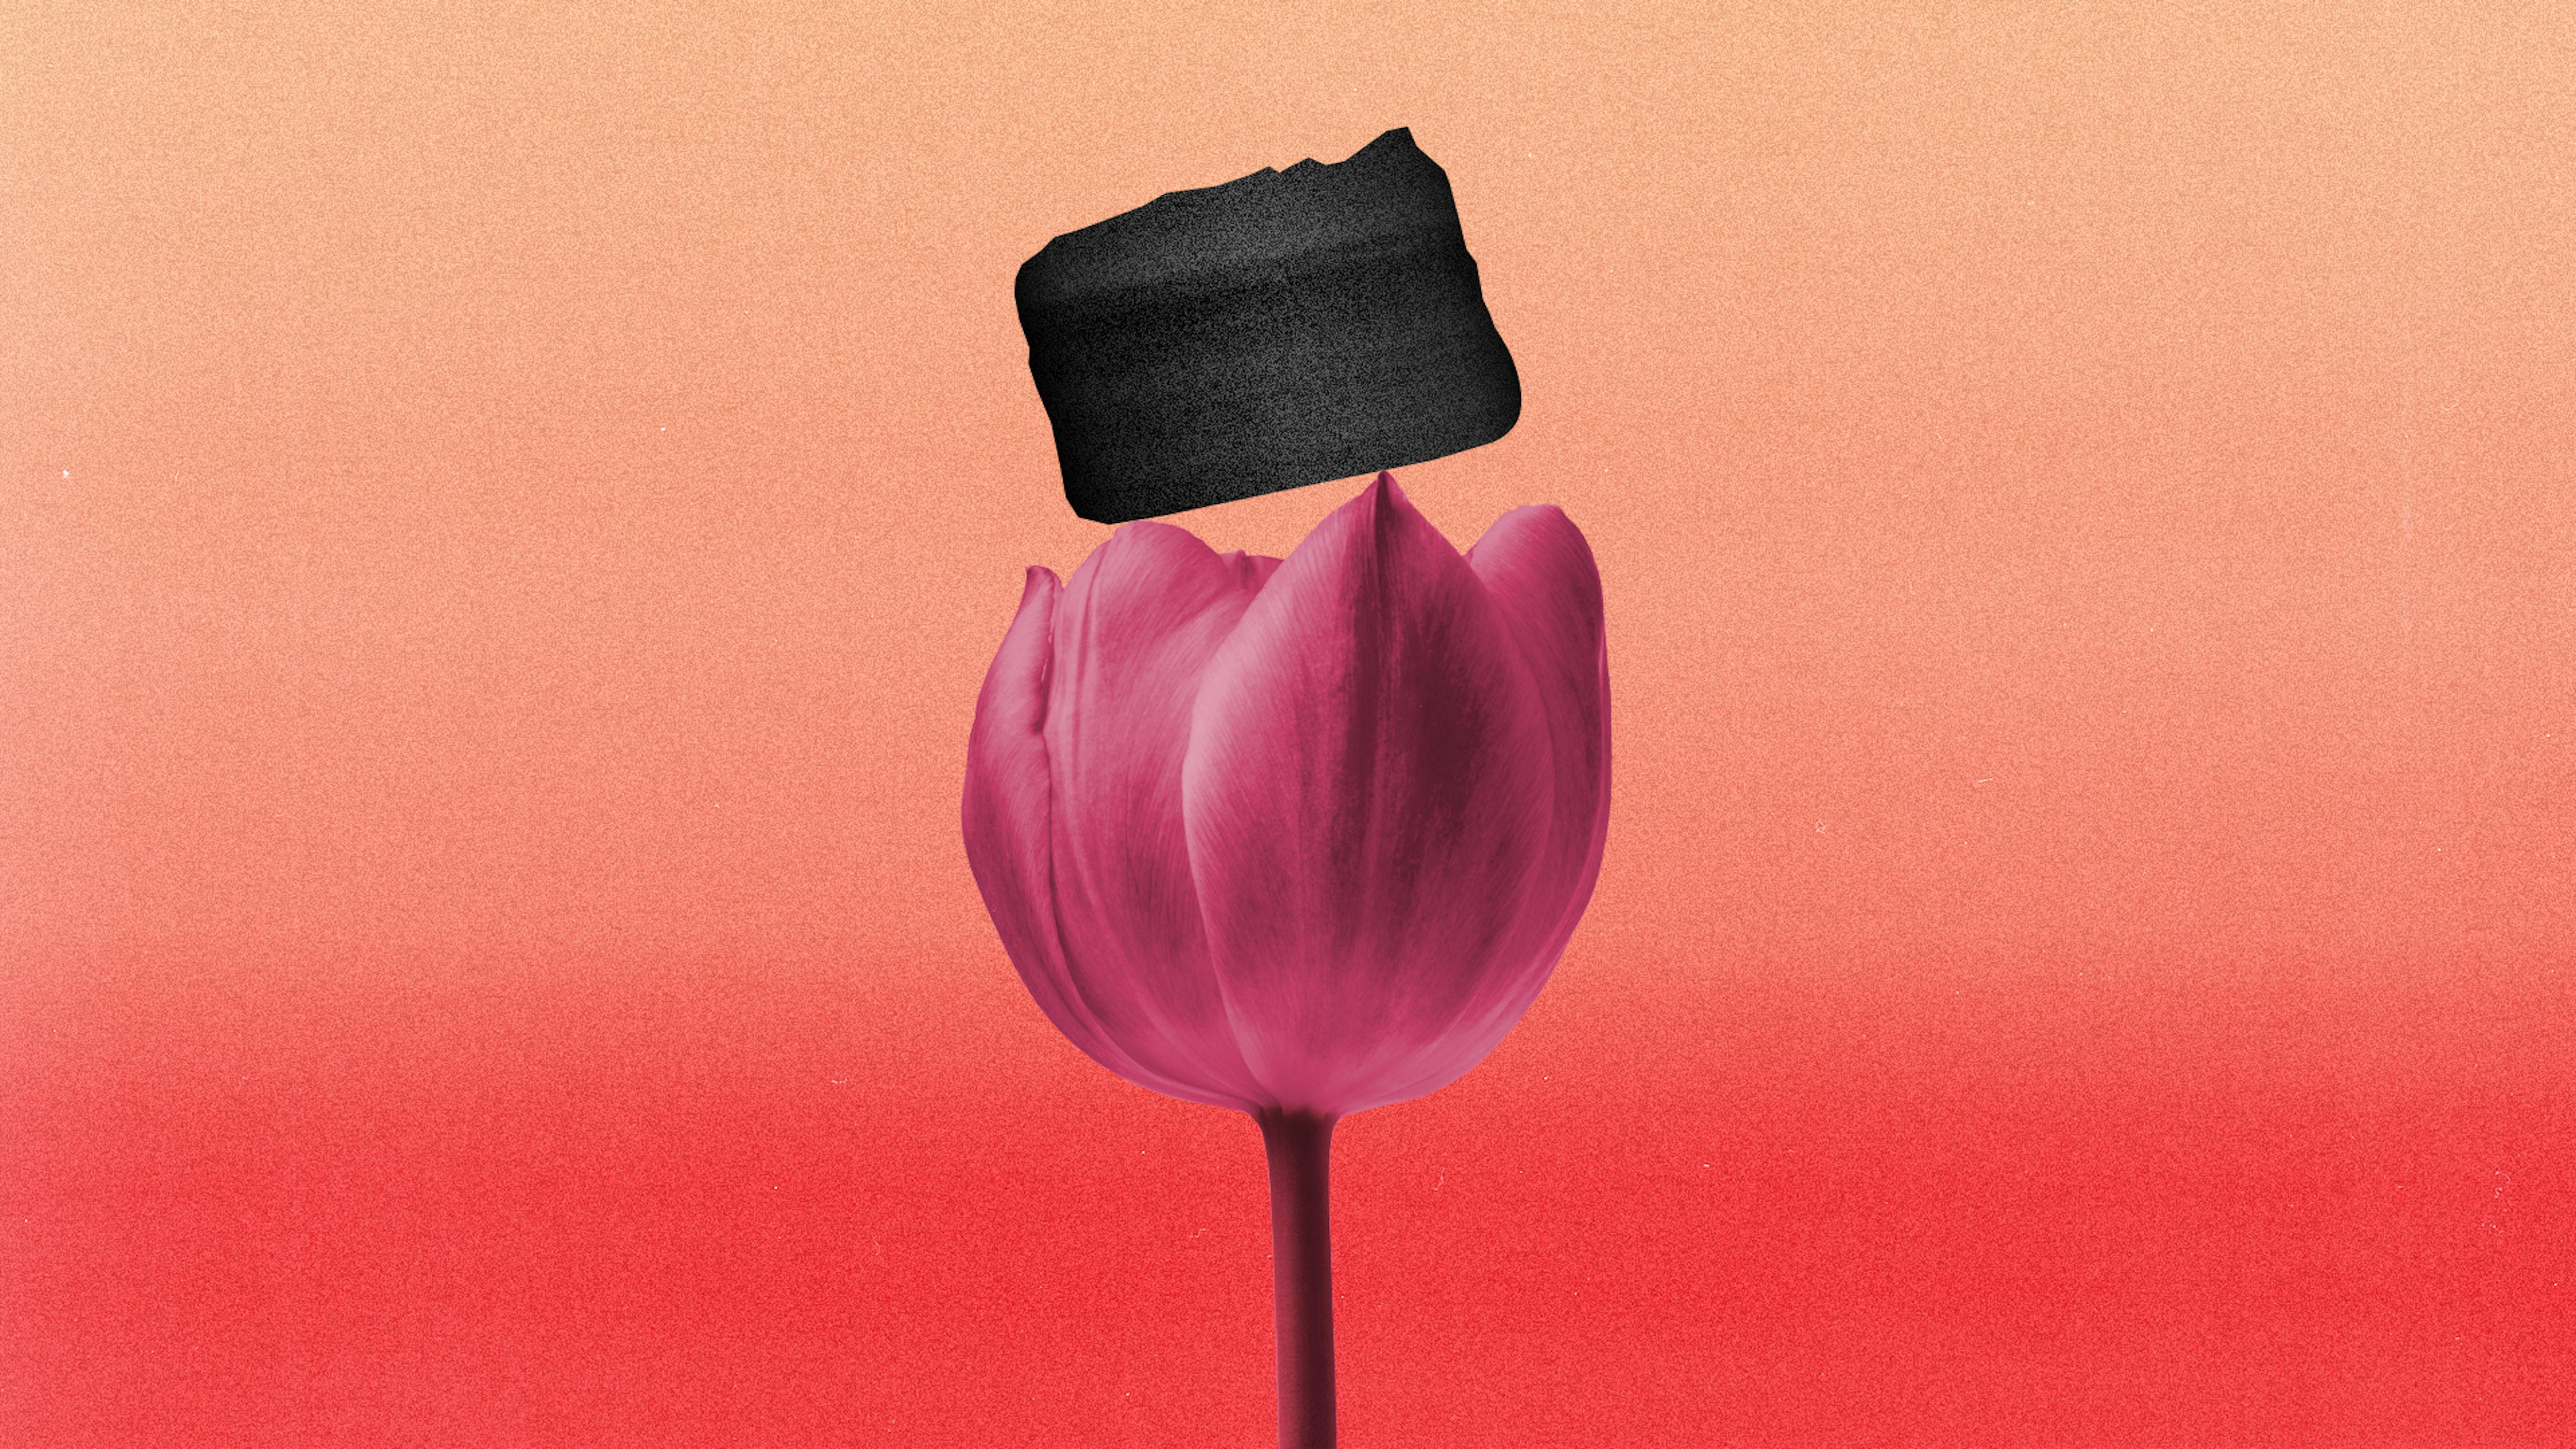 A piece of aerographene, resting lightly on a pink tulip's petals against a gradient sunset-coloured background.